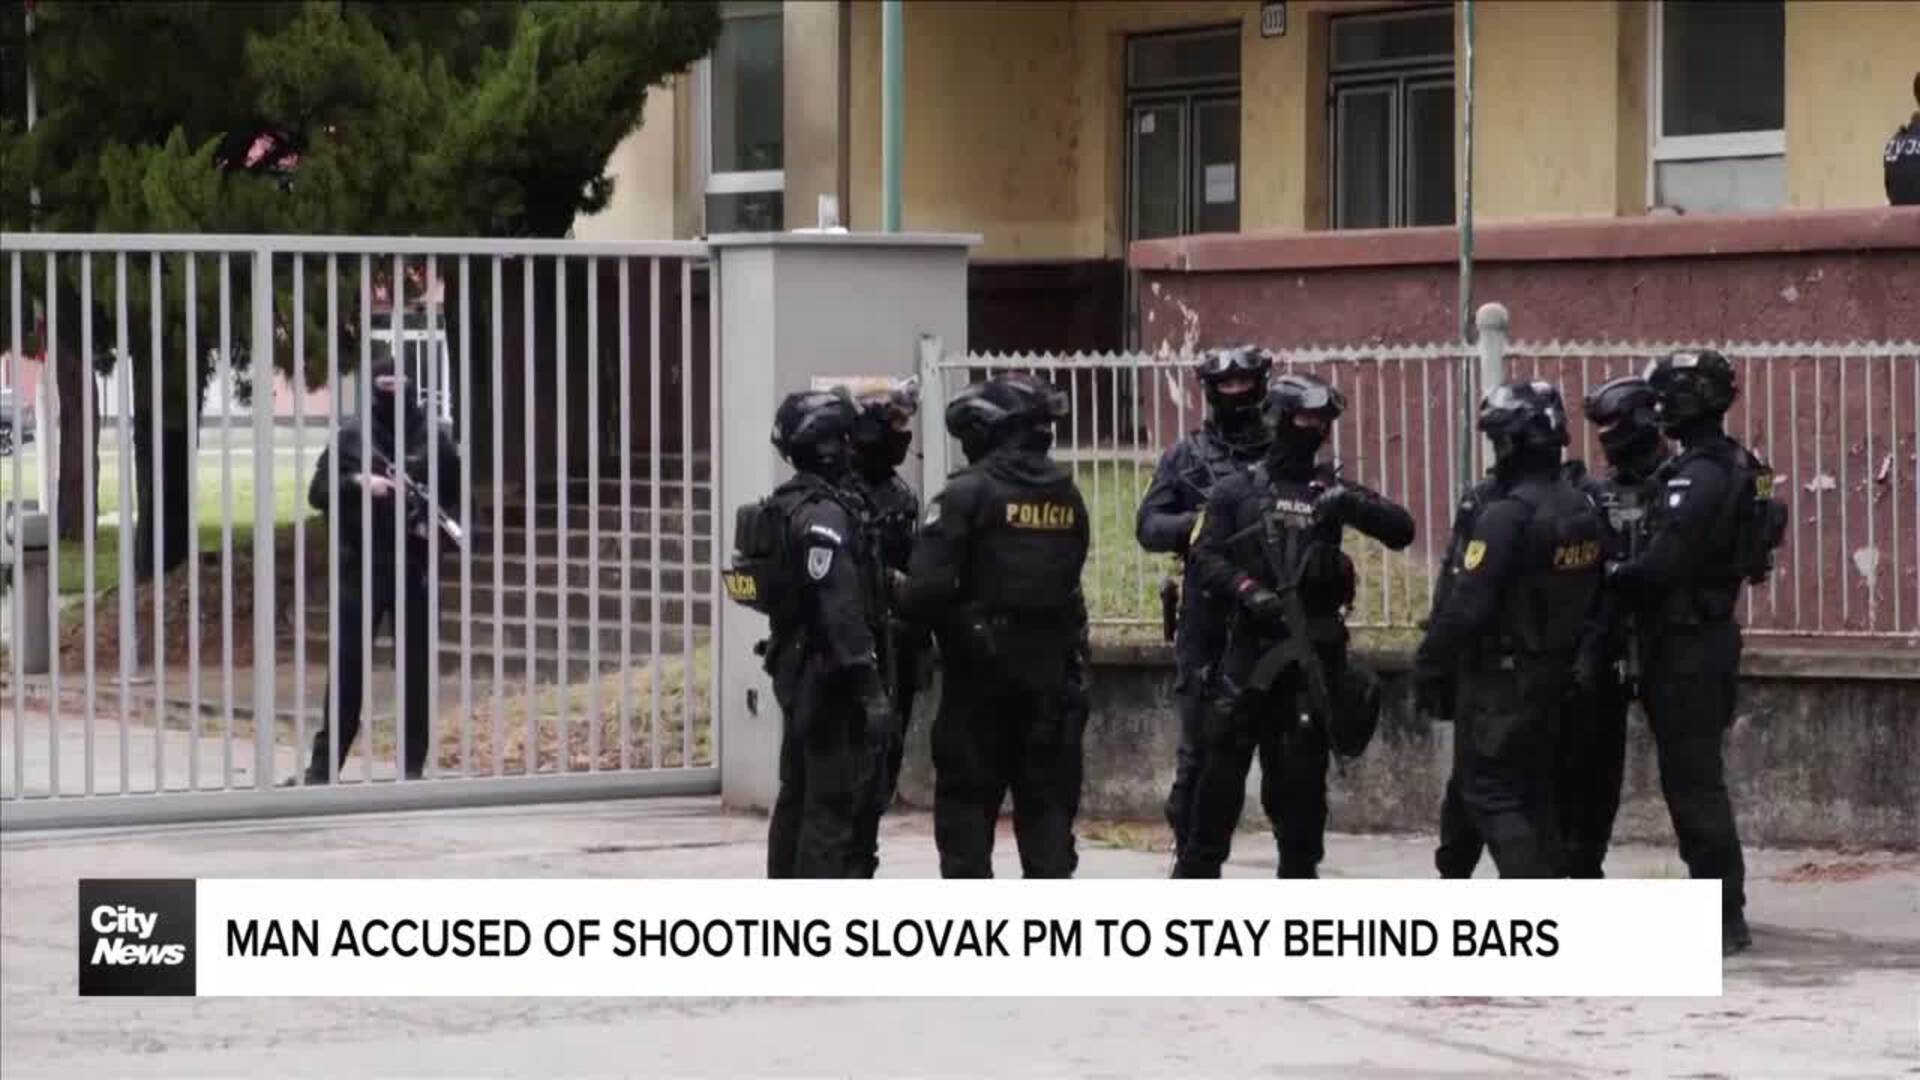 Man accused of shooting Slovak PM charged with attempted murder